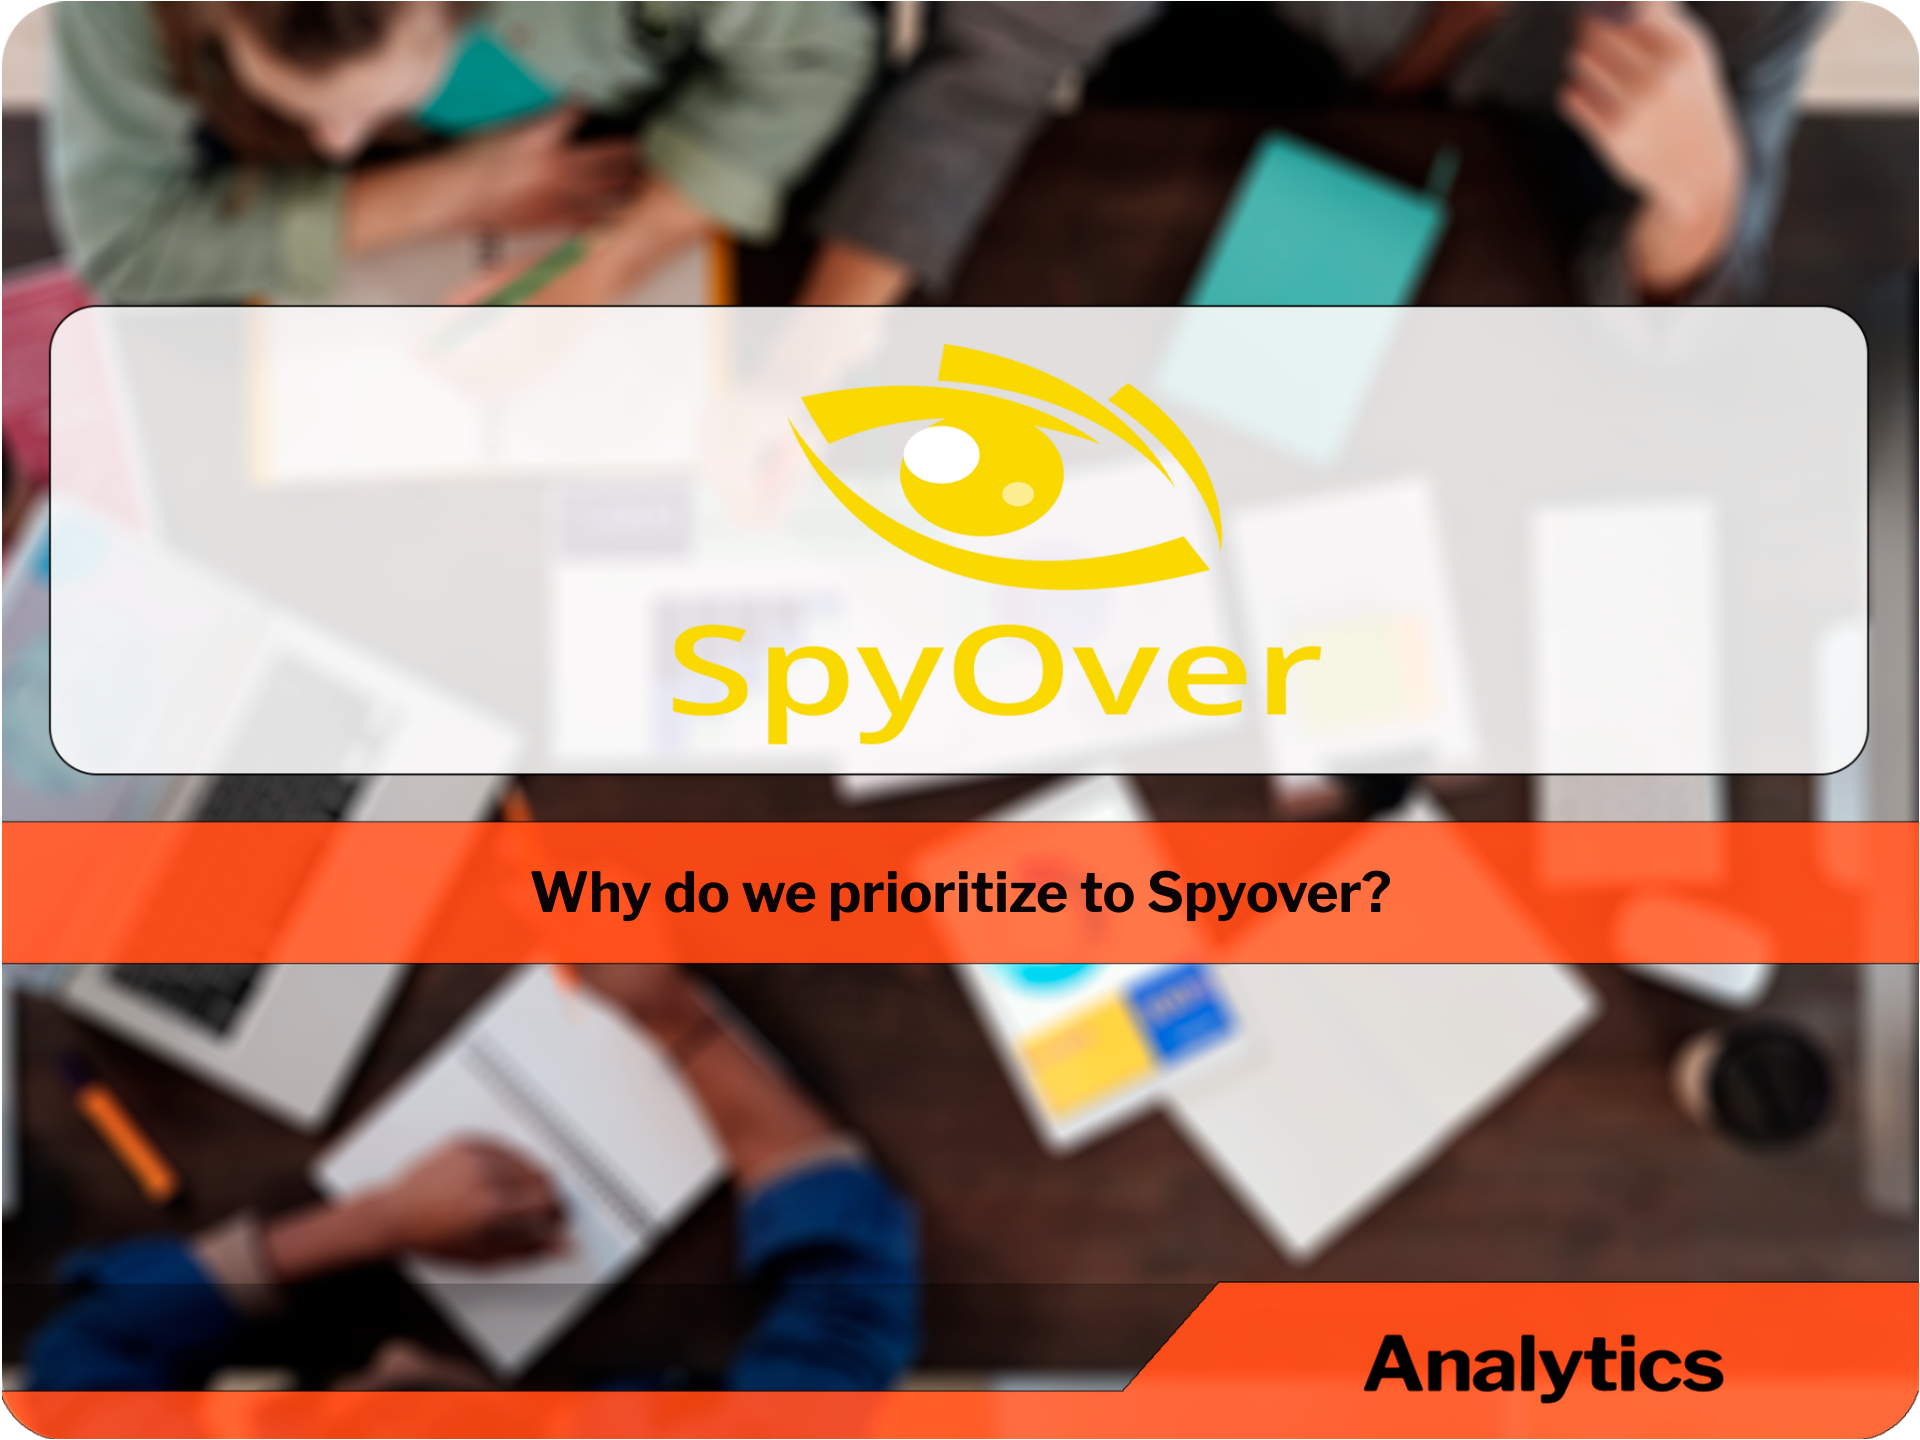 Why do we prioritize to Spyover?